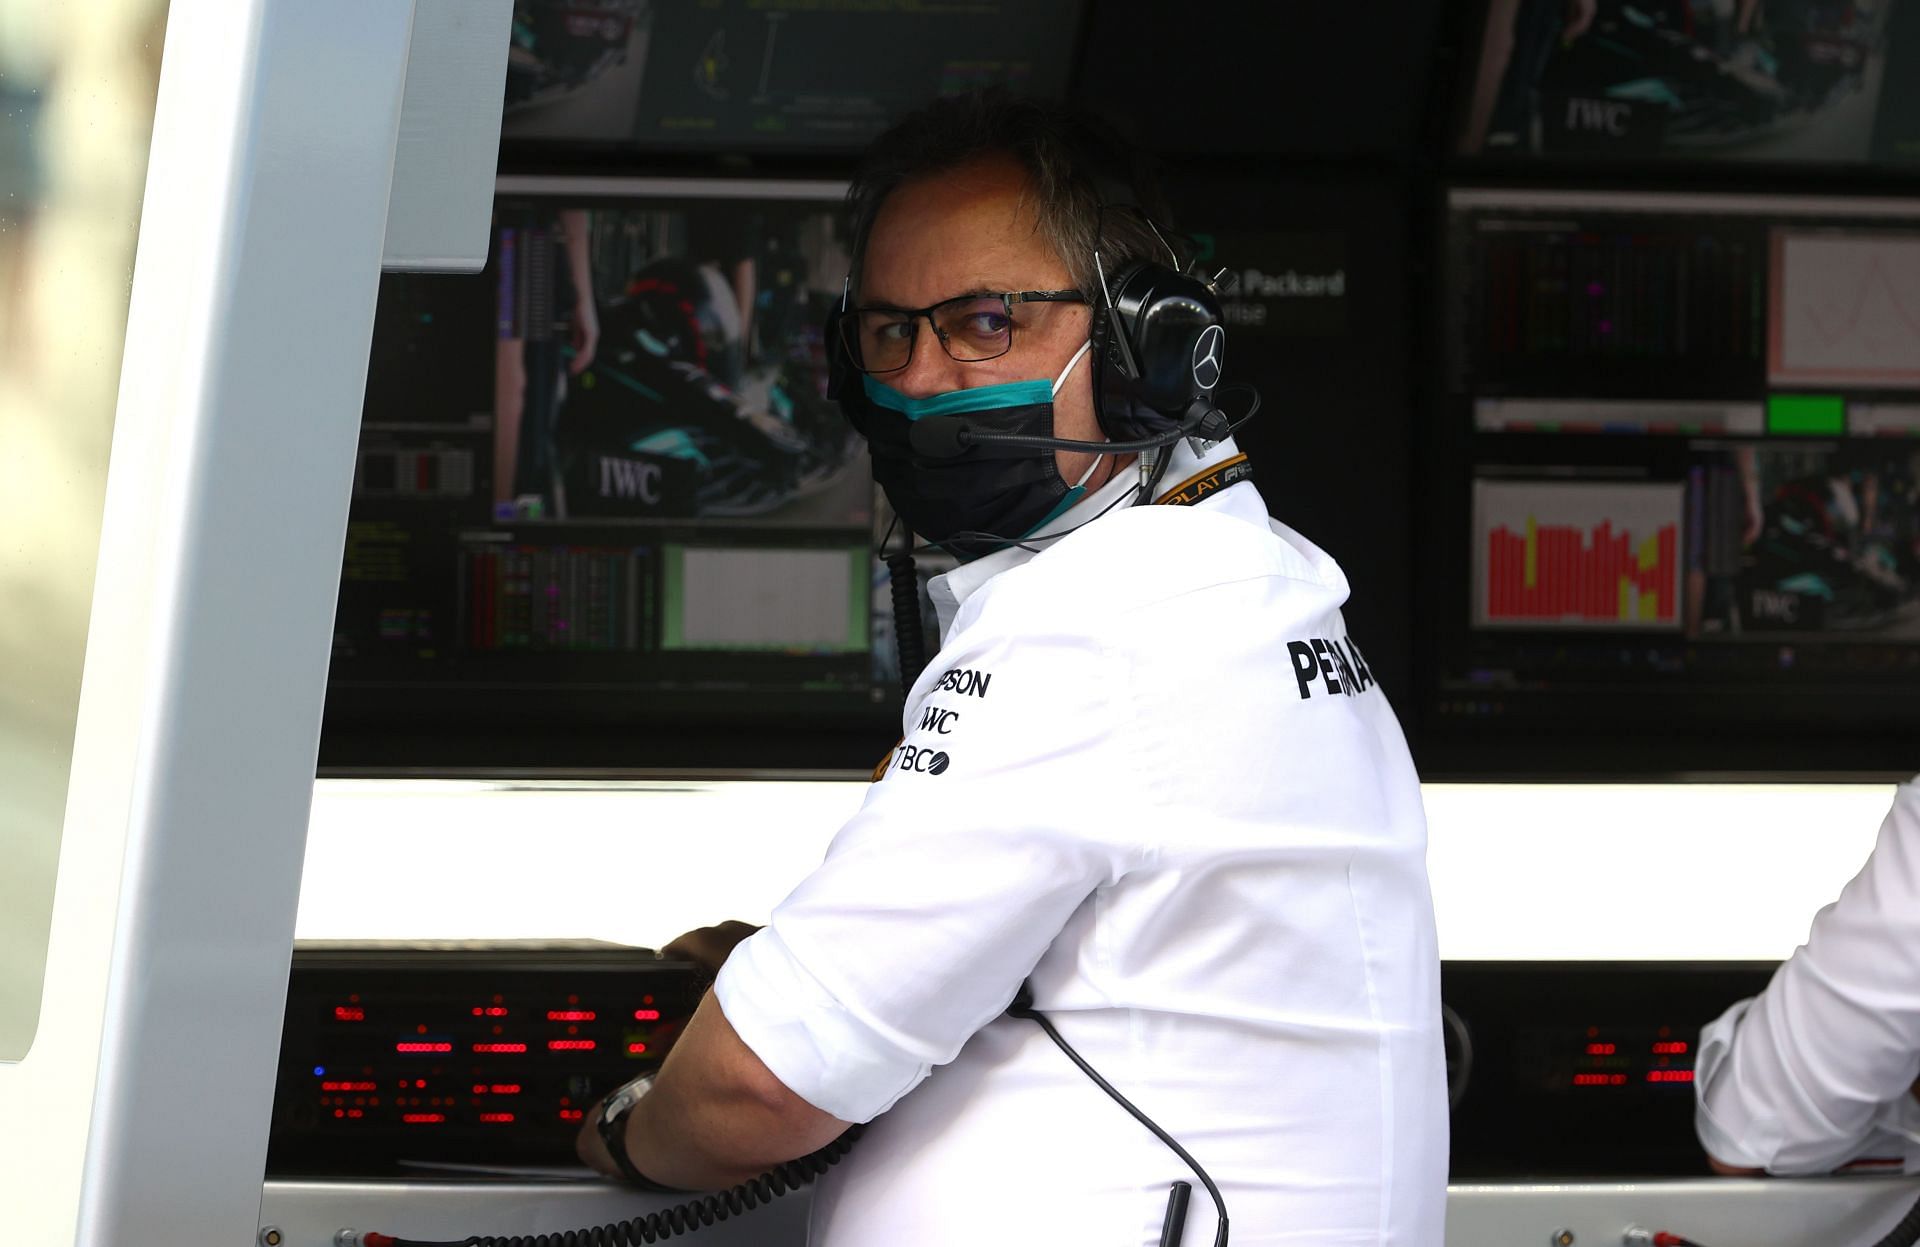 Ron Meadows on Mercedes pit wall at the 2021 Abu Dhabi Grand Prix